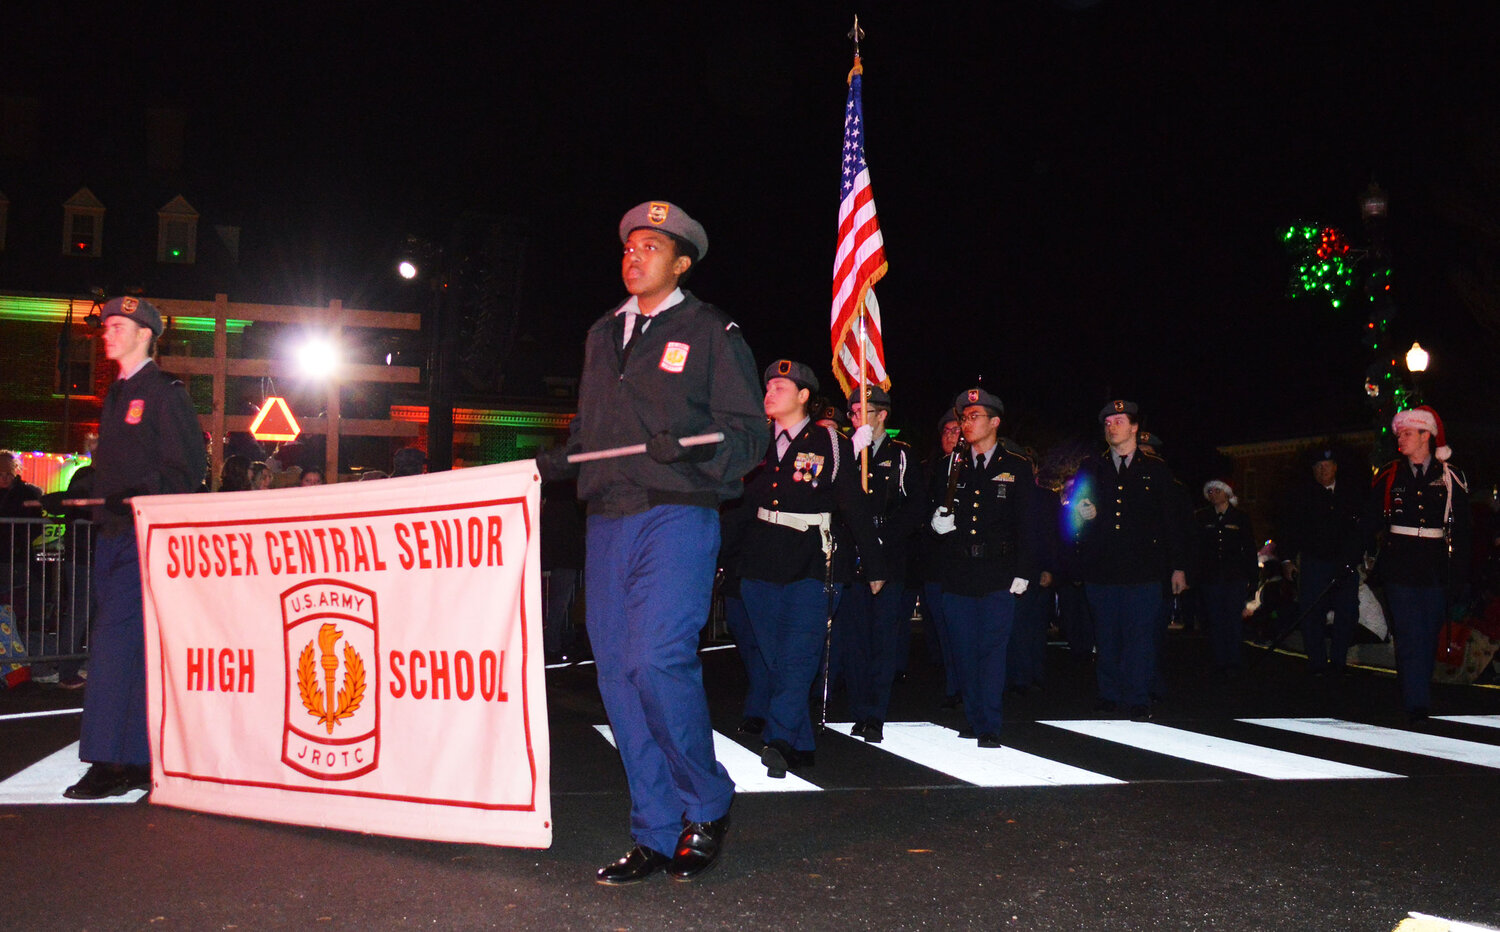 The Sussex Central High School Army Junior ROTC winds through The Circle during the Georgetown Christmas Parade on Thursday.